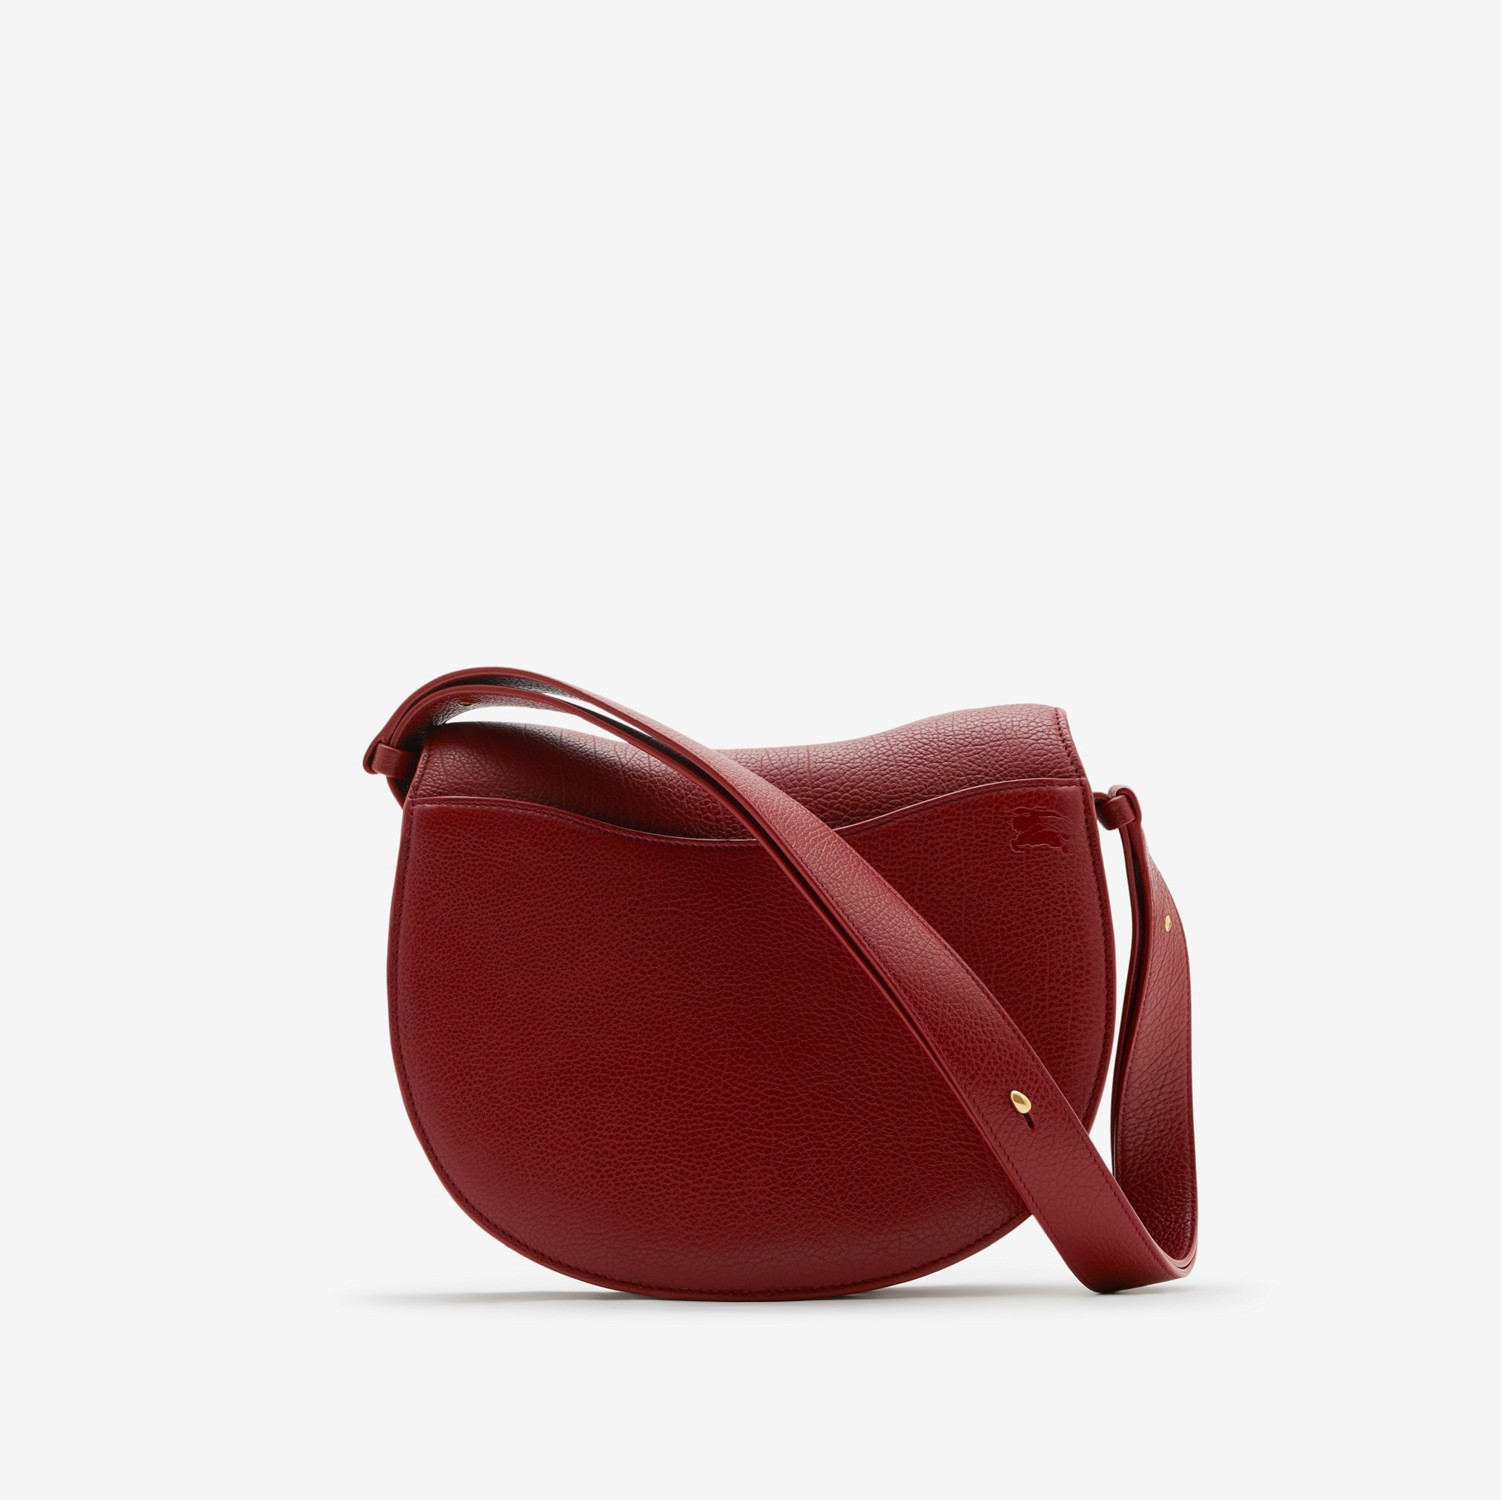 Medium Rocking Horse Bag in Ruby - Women | Burberry® Official